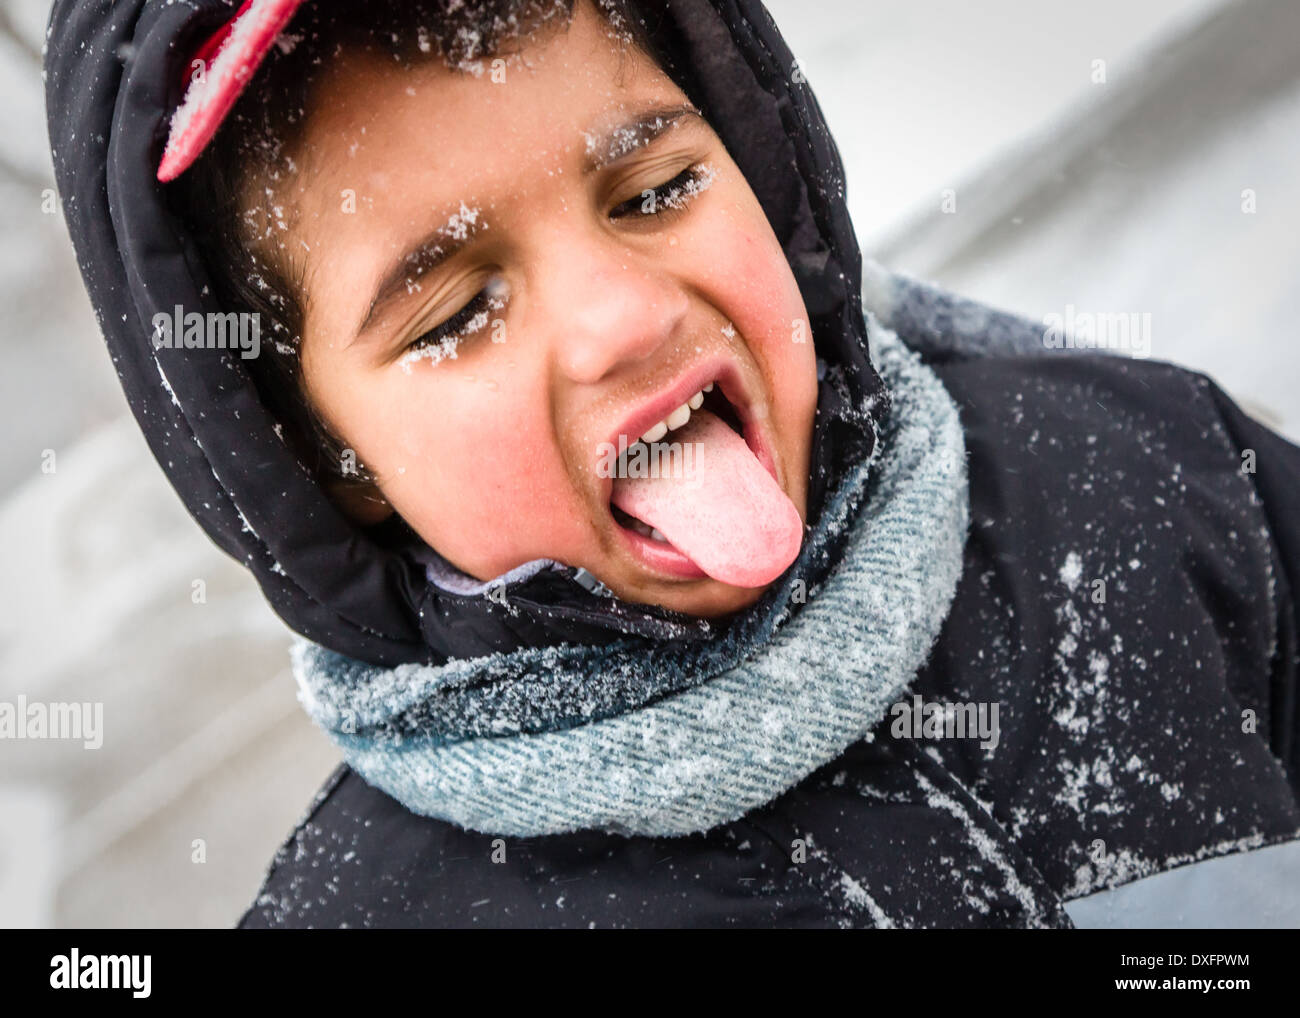 Young boy playing catching snowflakes on his tongue. Stock Photo